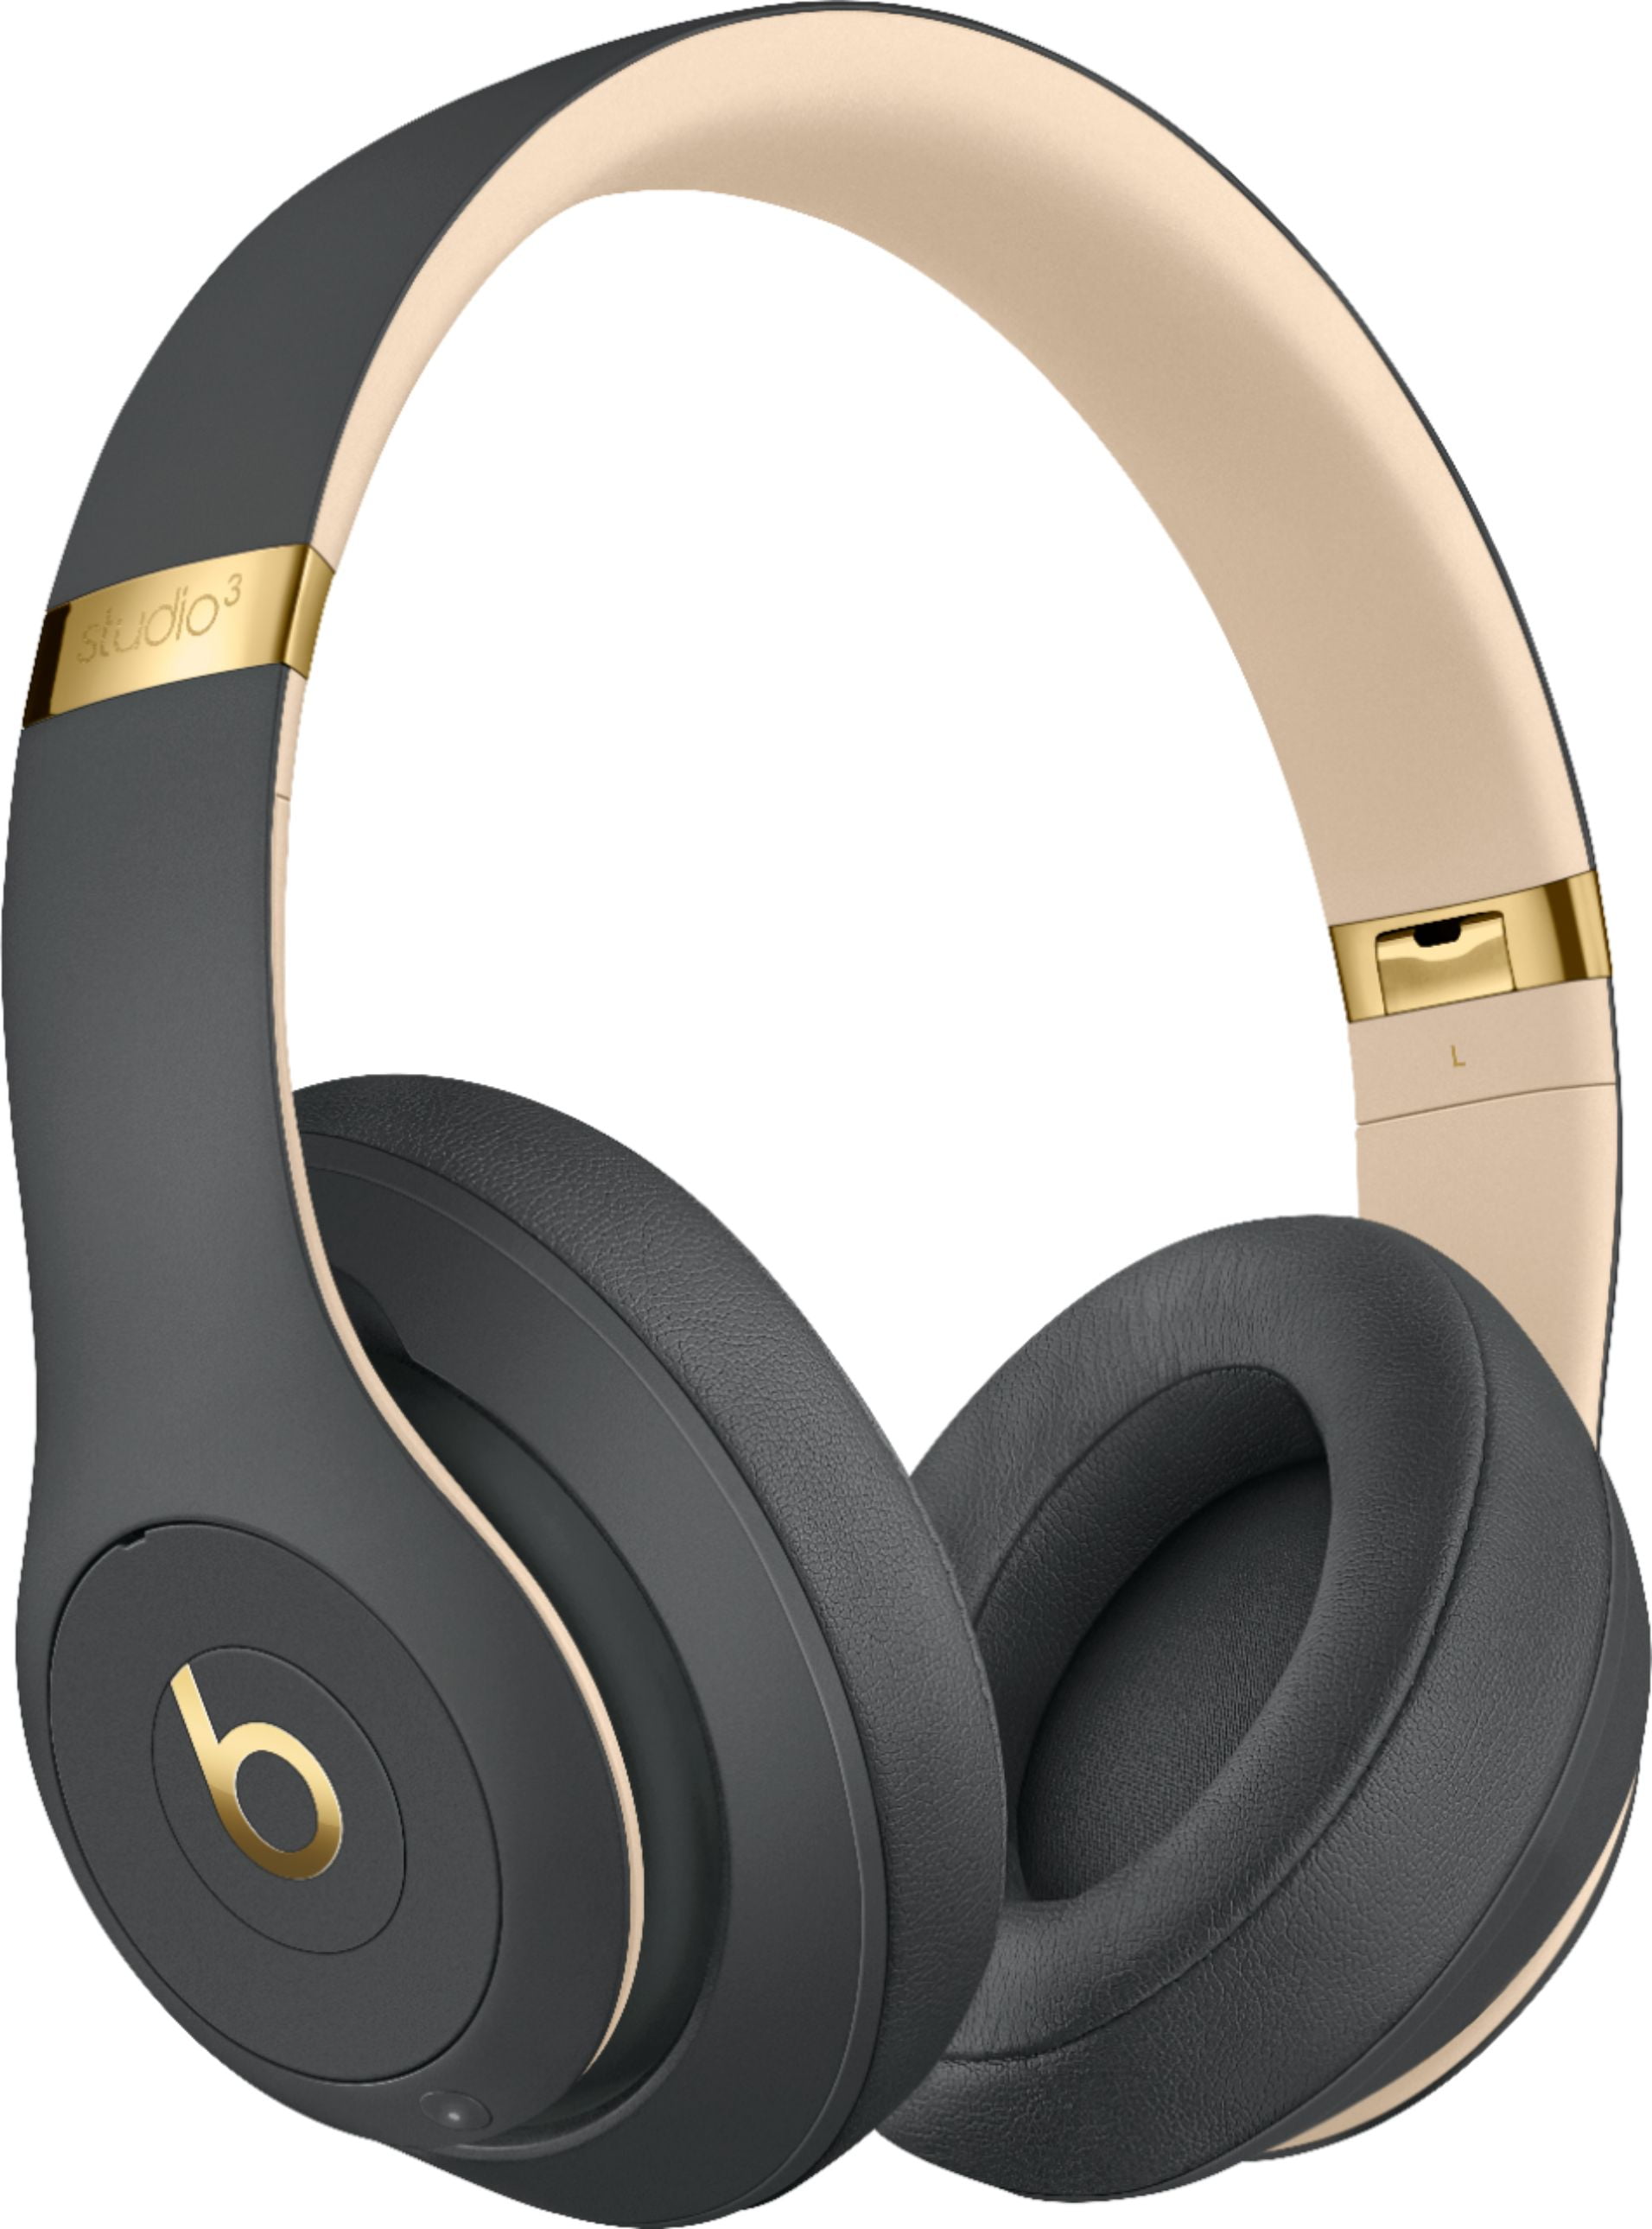 Beats by Dr. Dre Bluetooth Noise-Canceling Over-Ear Headphones, Midnight  Black, MTQW2LL/A